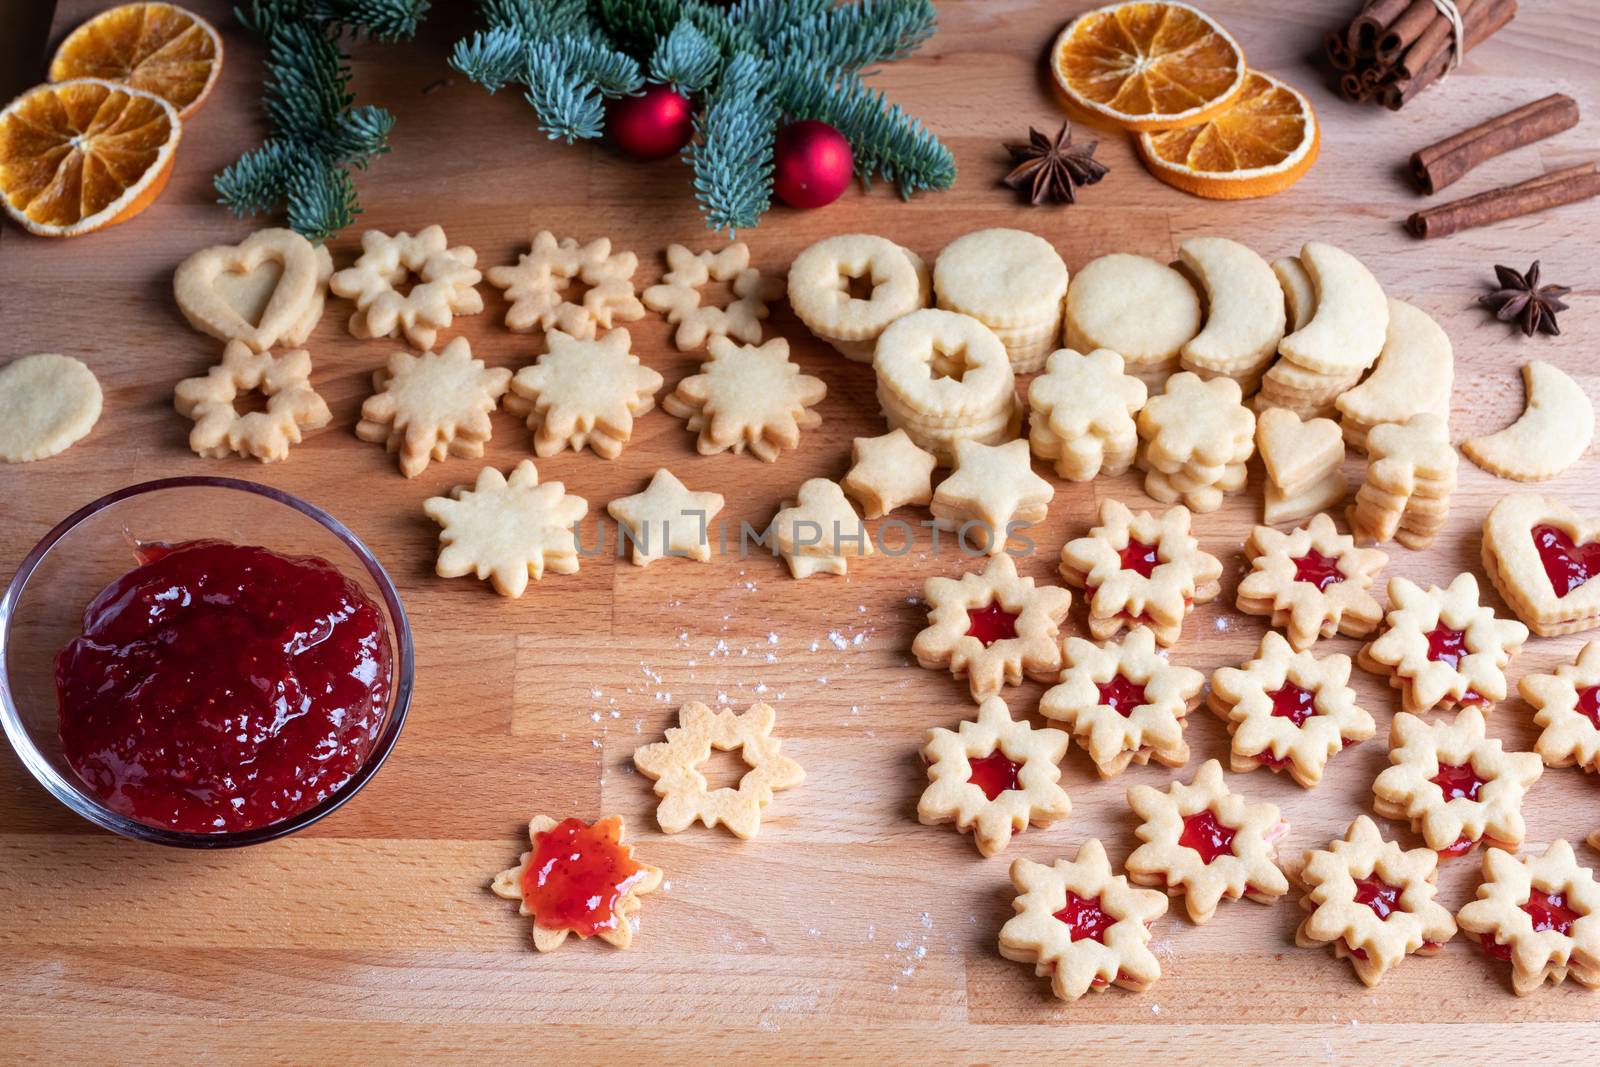 Filling traditional Linzer Christmas cookies with strawberry jam